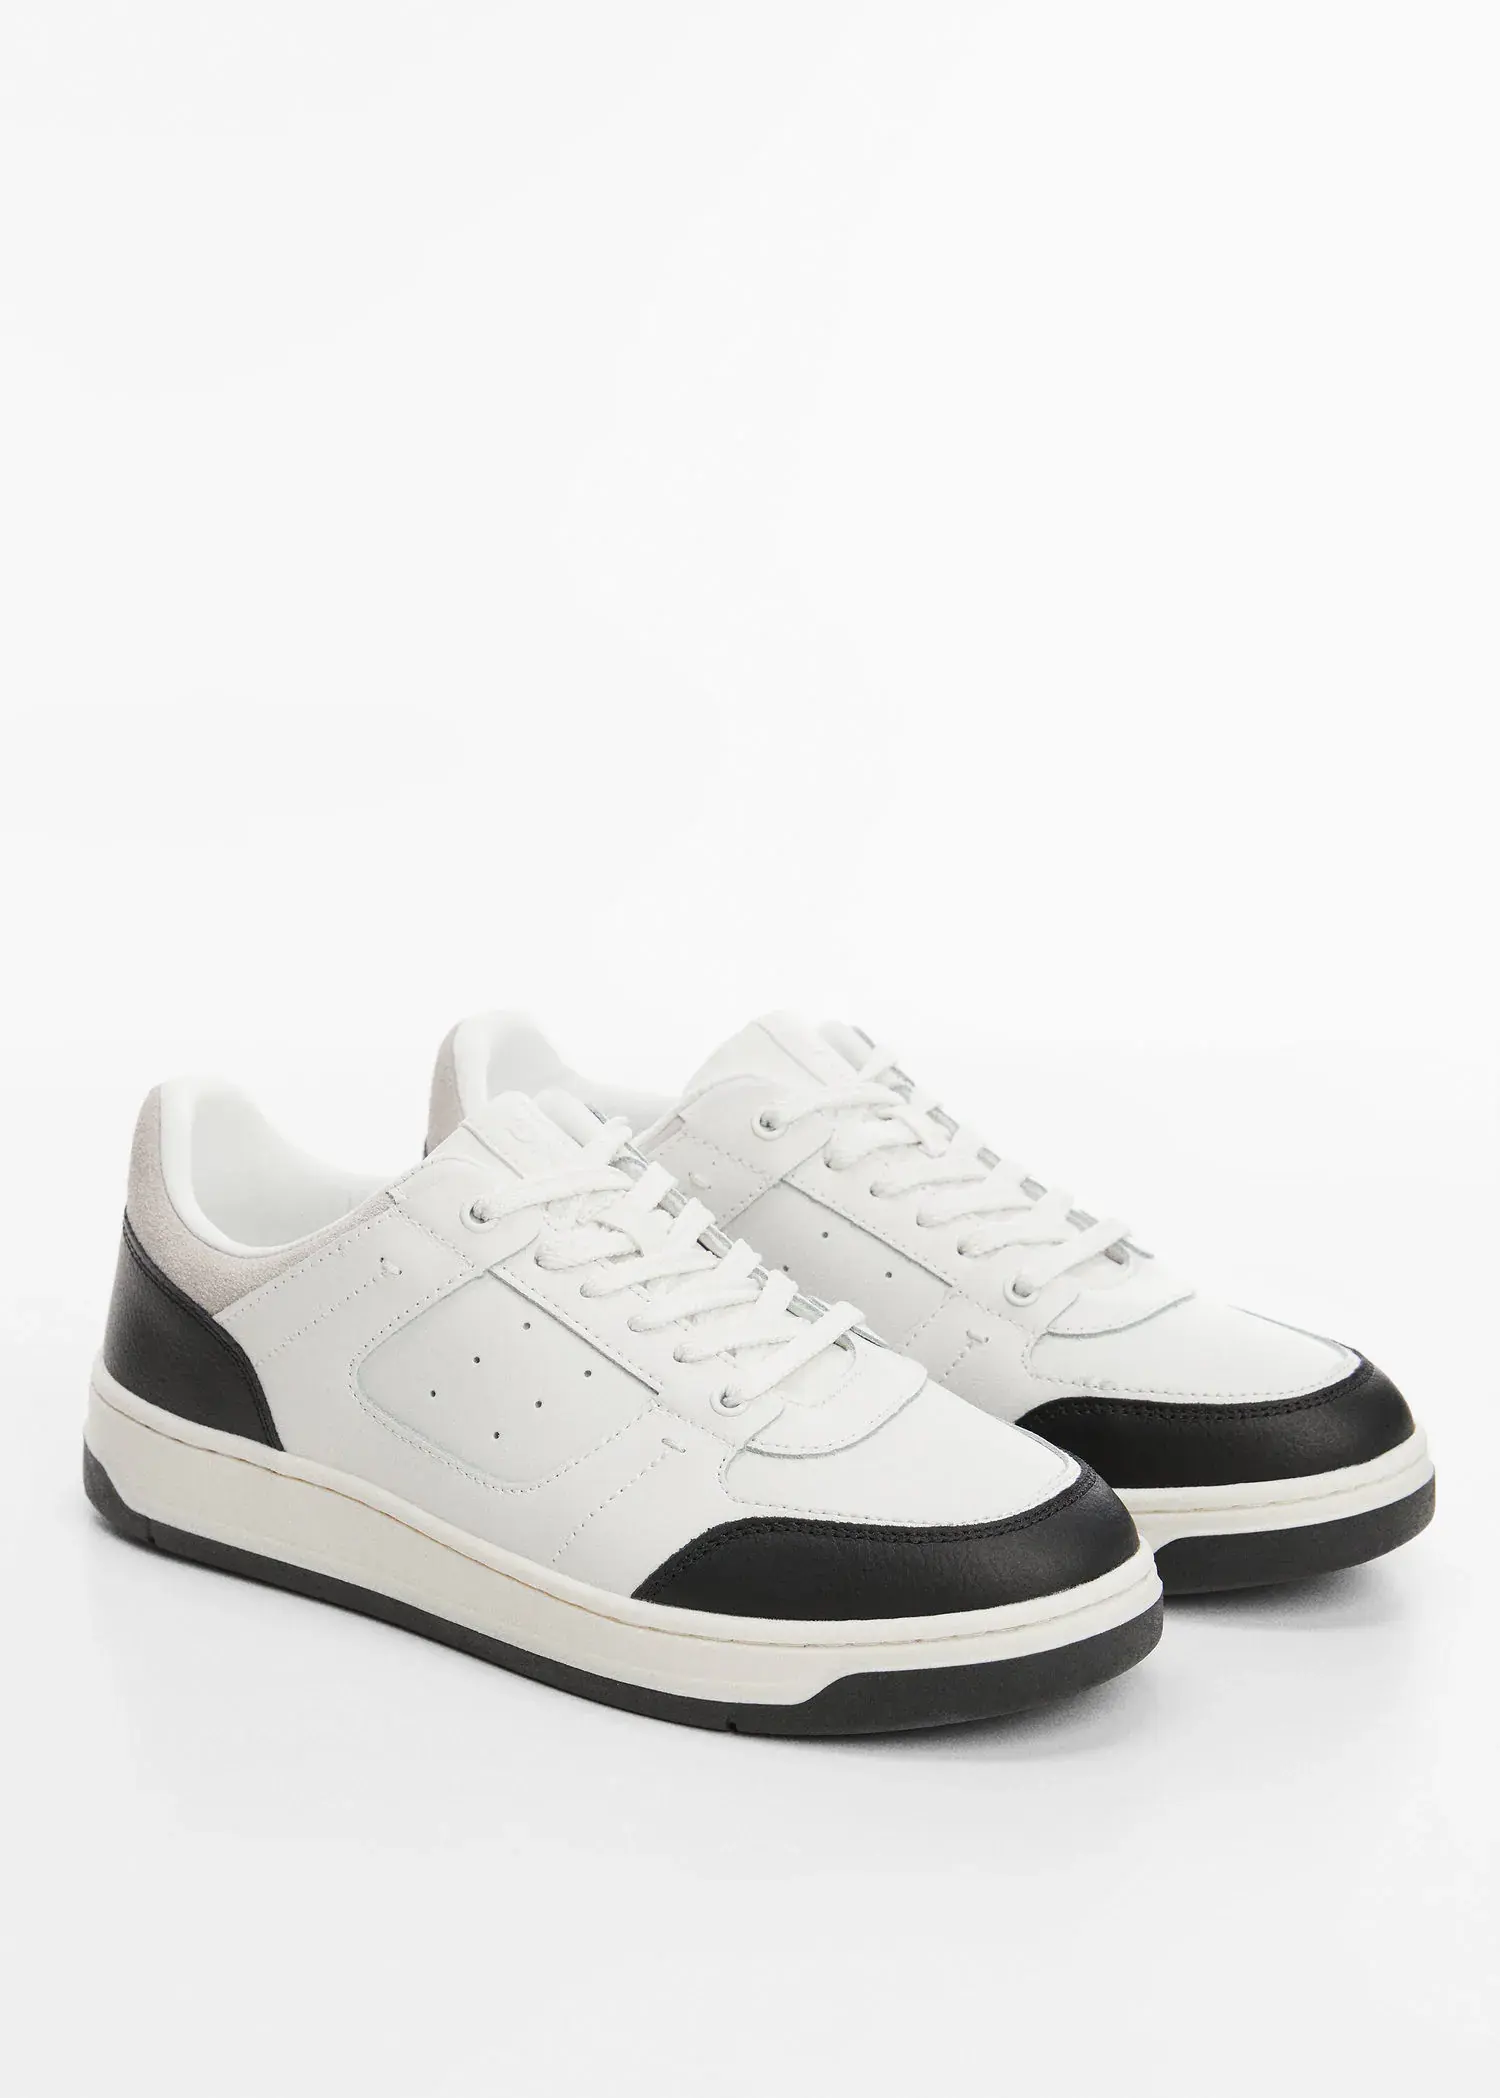 Mango Combined leather sneakers. 2